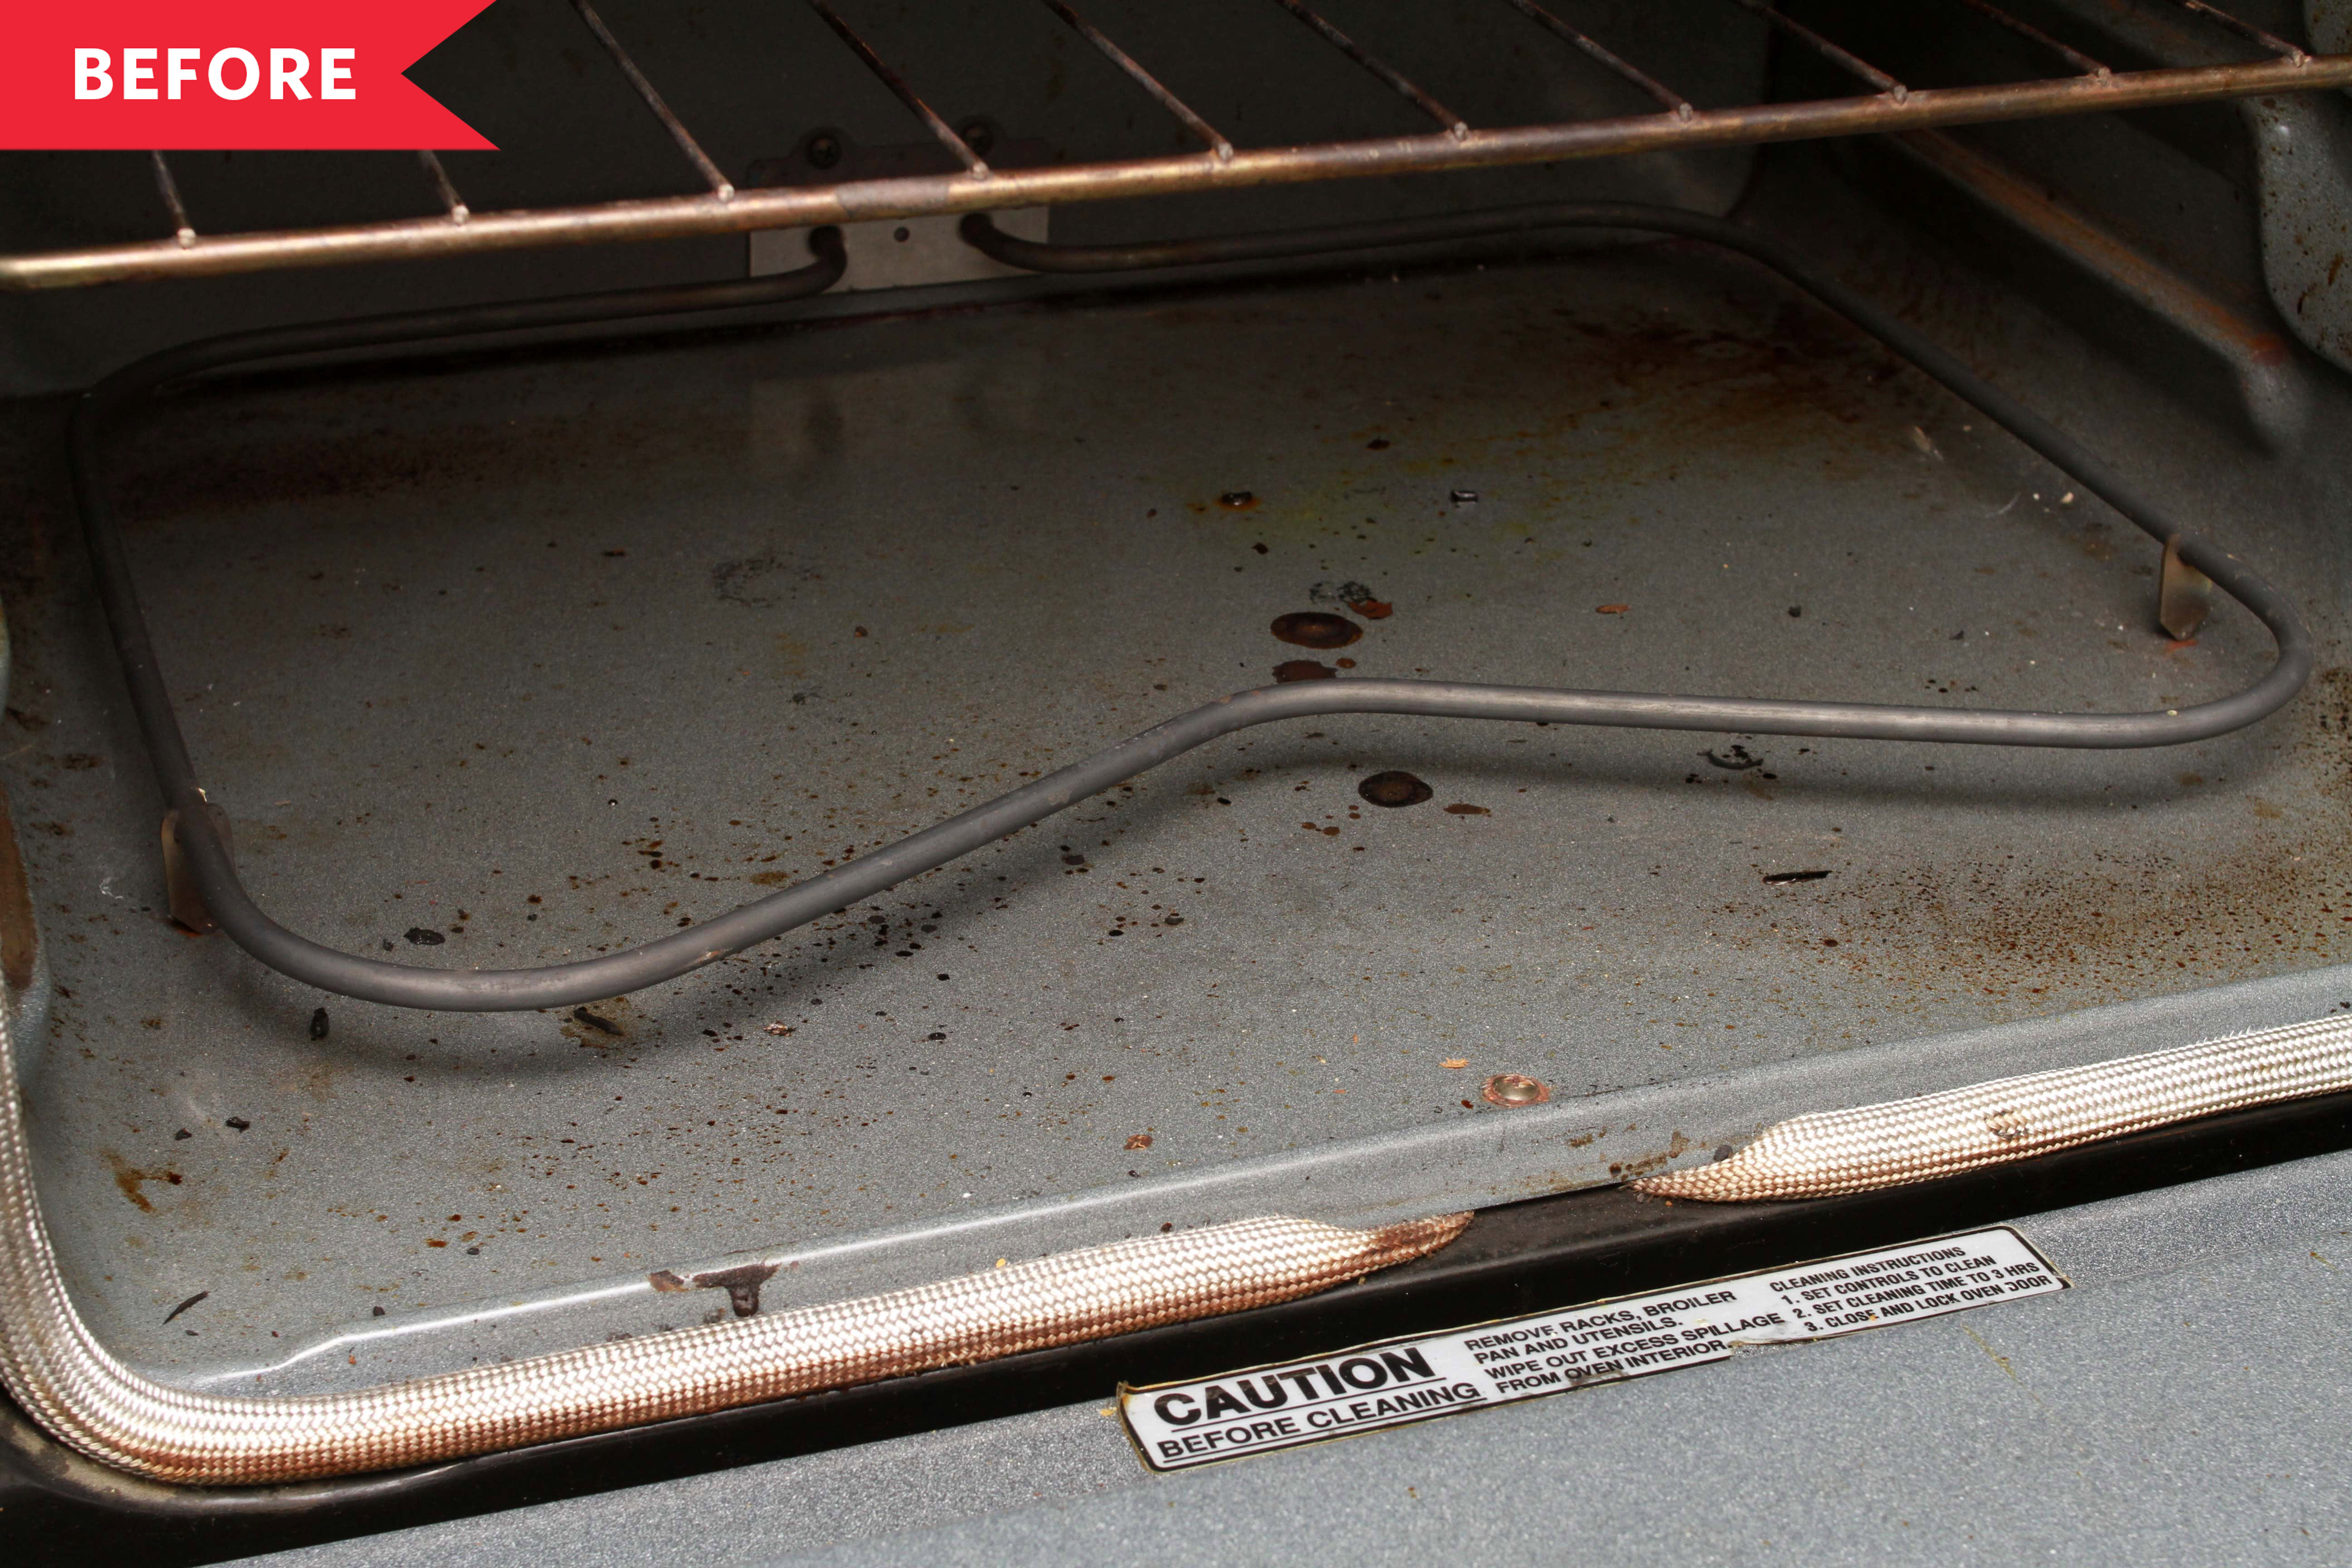 Use a Pumice Stone to Clean an Oven - Before & After Photos